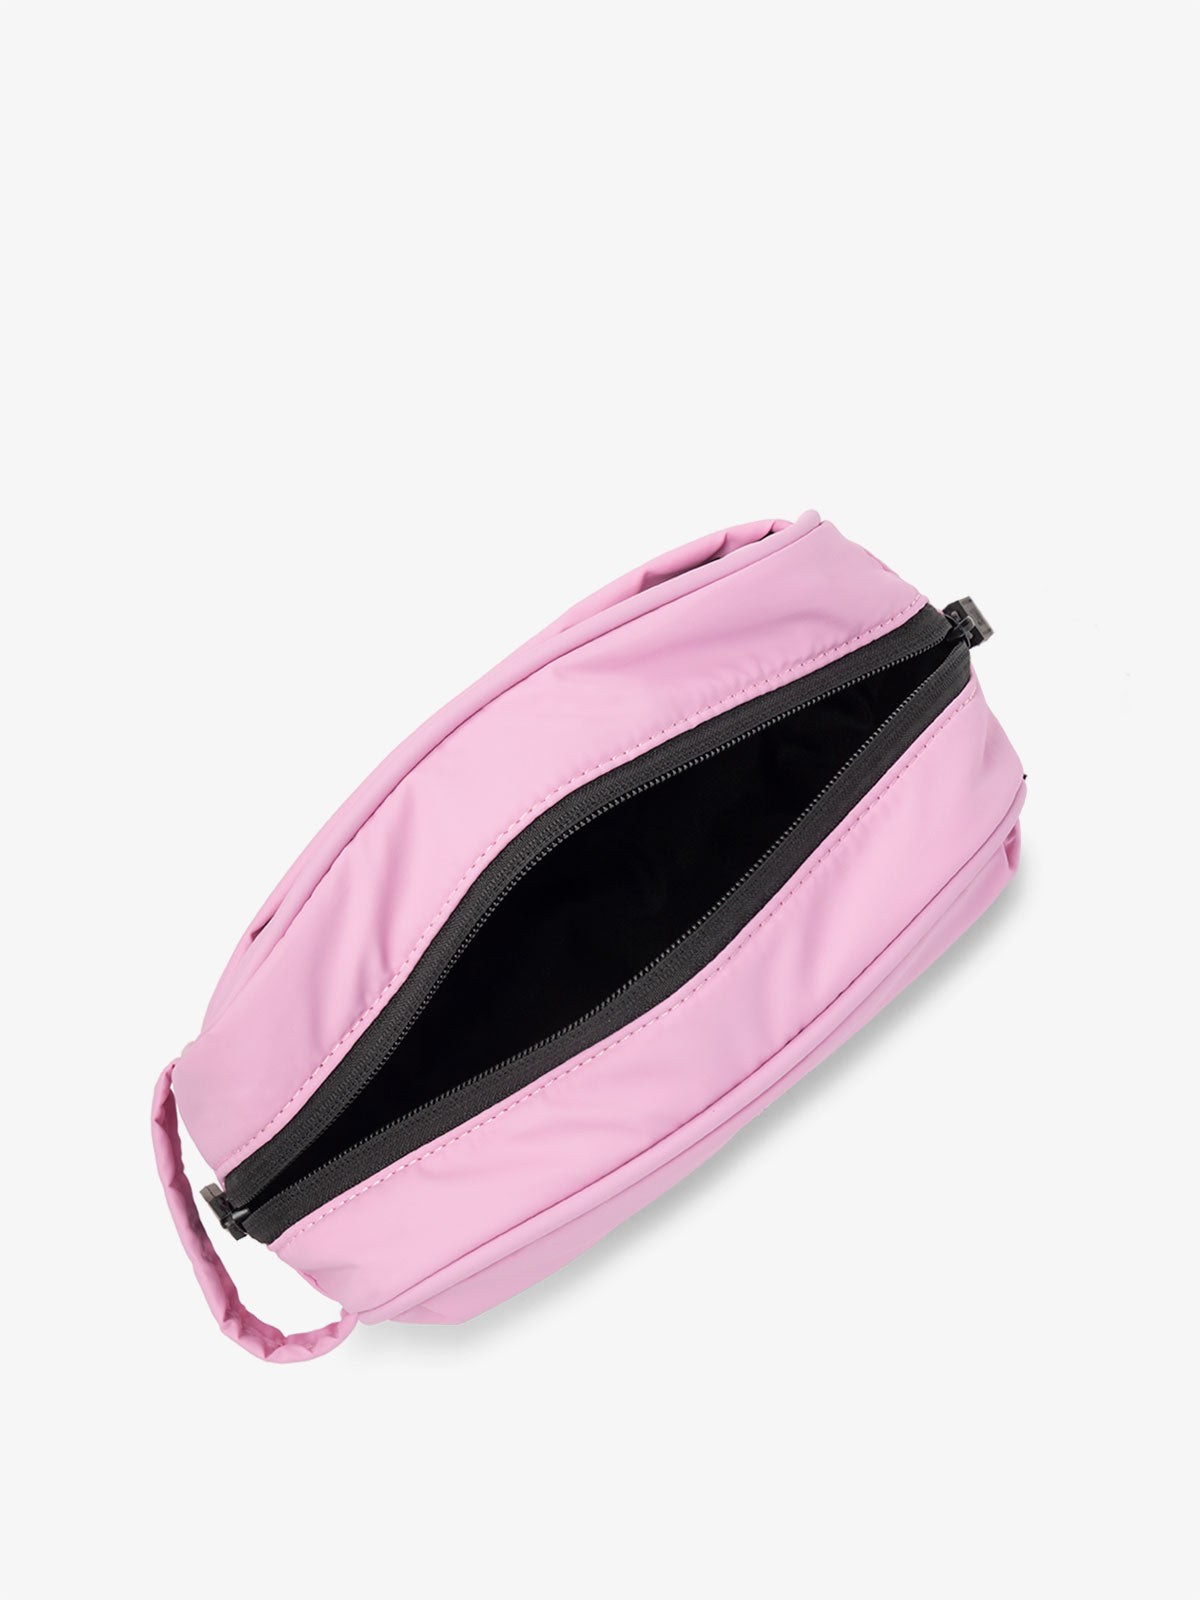 CALPAK Luka Toiletry Bag for skincare and water resistant interior lining in pink